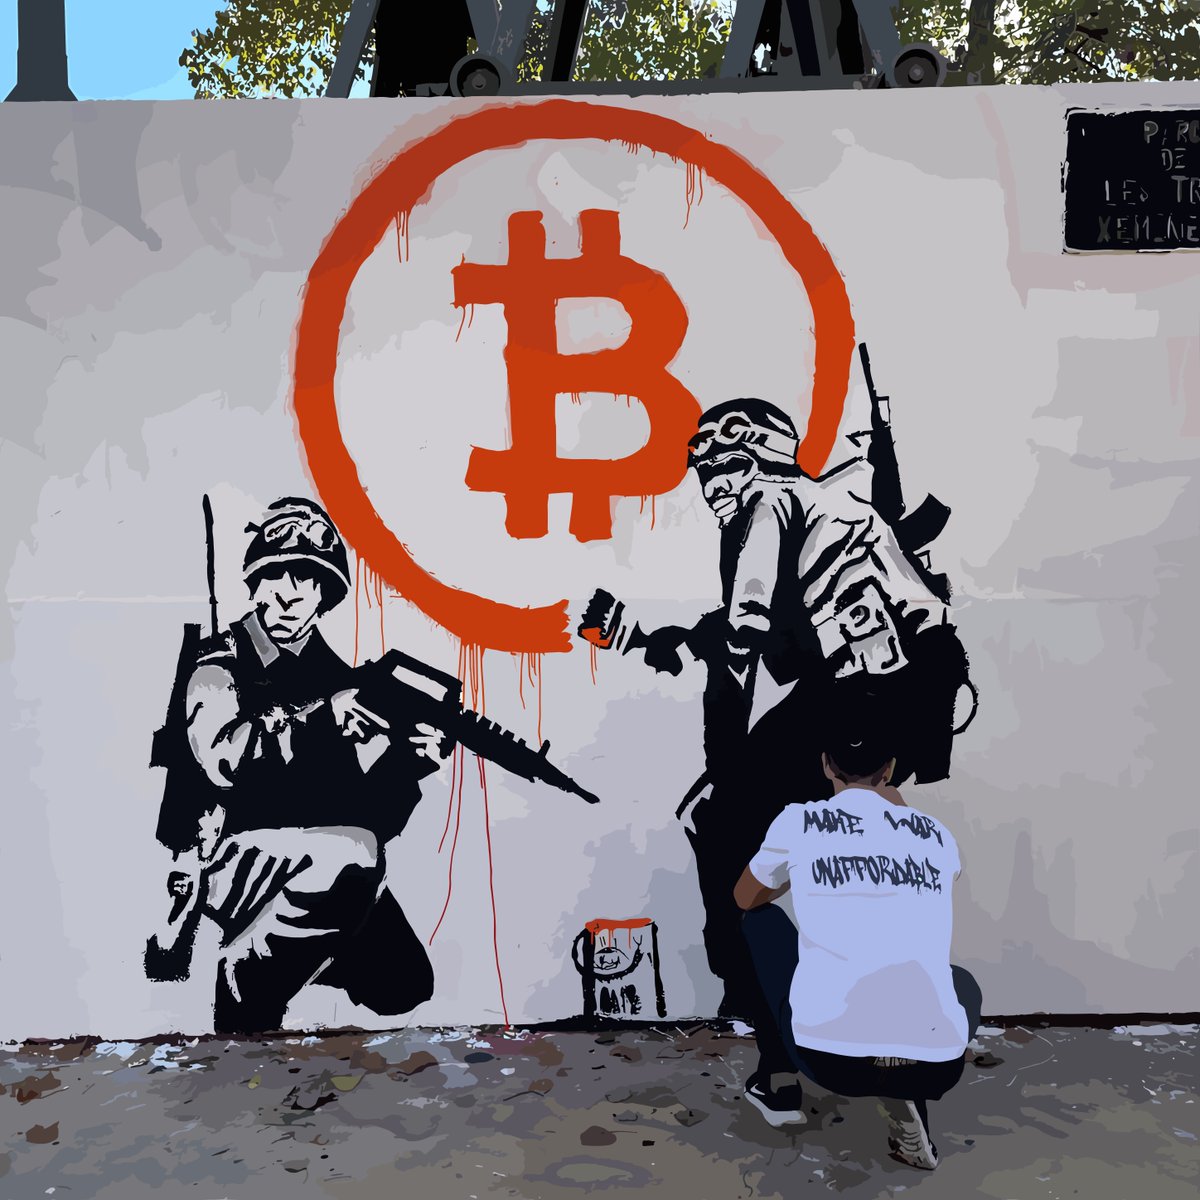 Spark your curiosity at 'Bitcoin: The Art of Revolution'!  Free entry to this thought-provoking art exhibition. ️ Sep 24 - Oct 20, ArteVistas Barcelona. #BarcelonaEvents #ArtLover